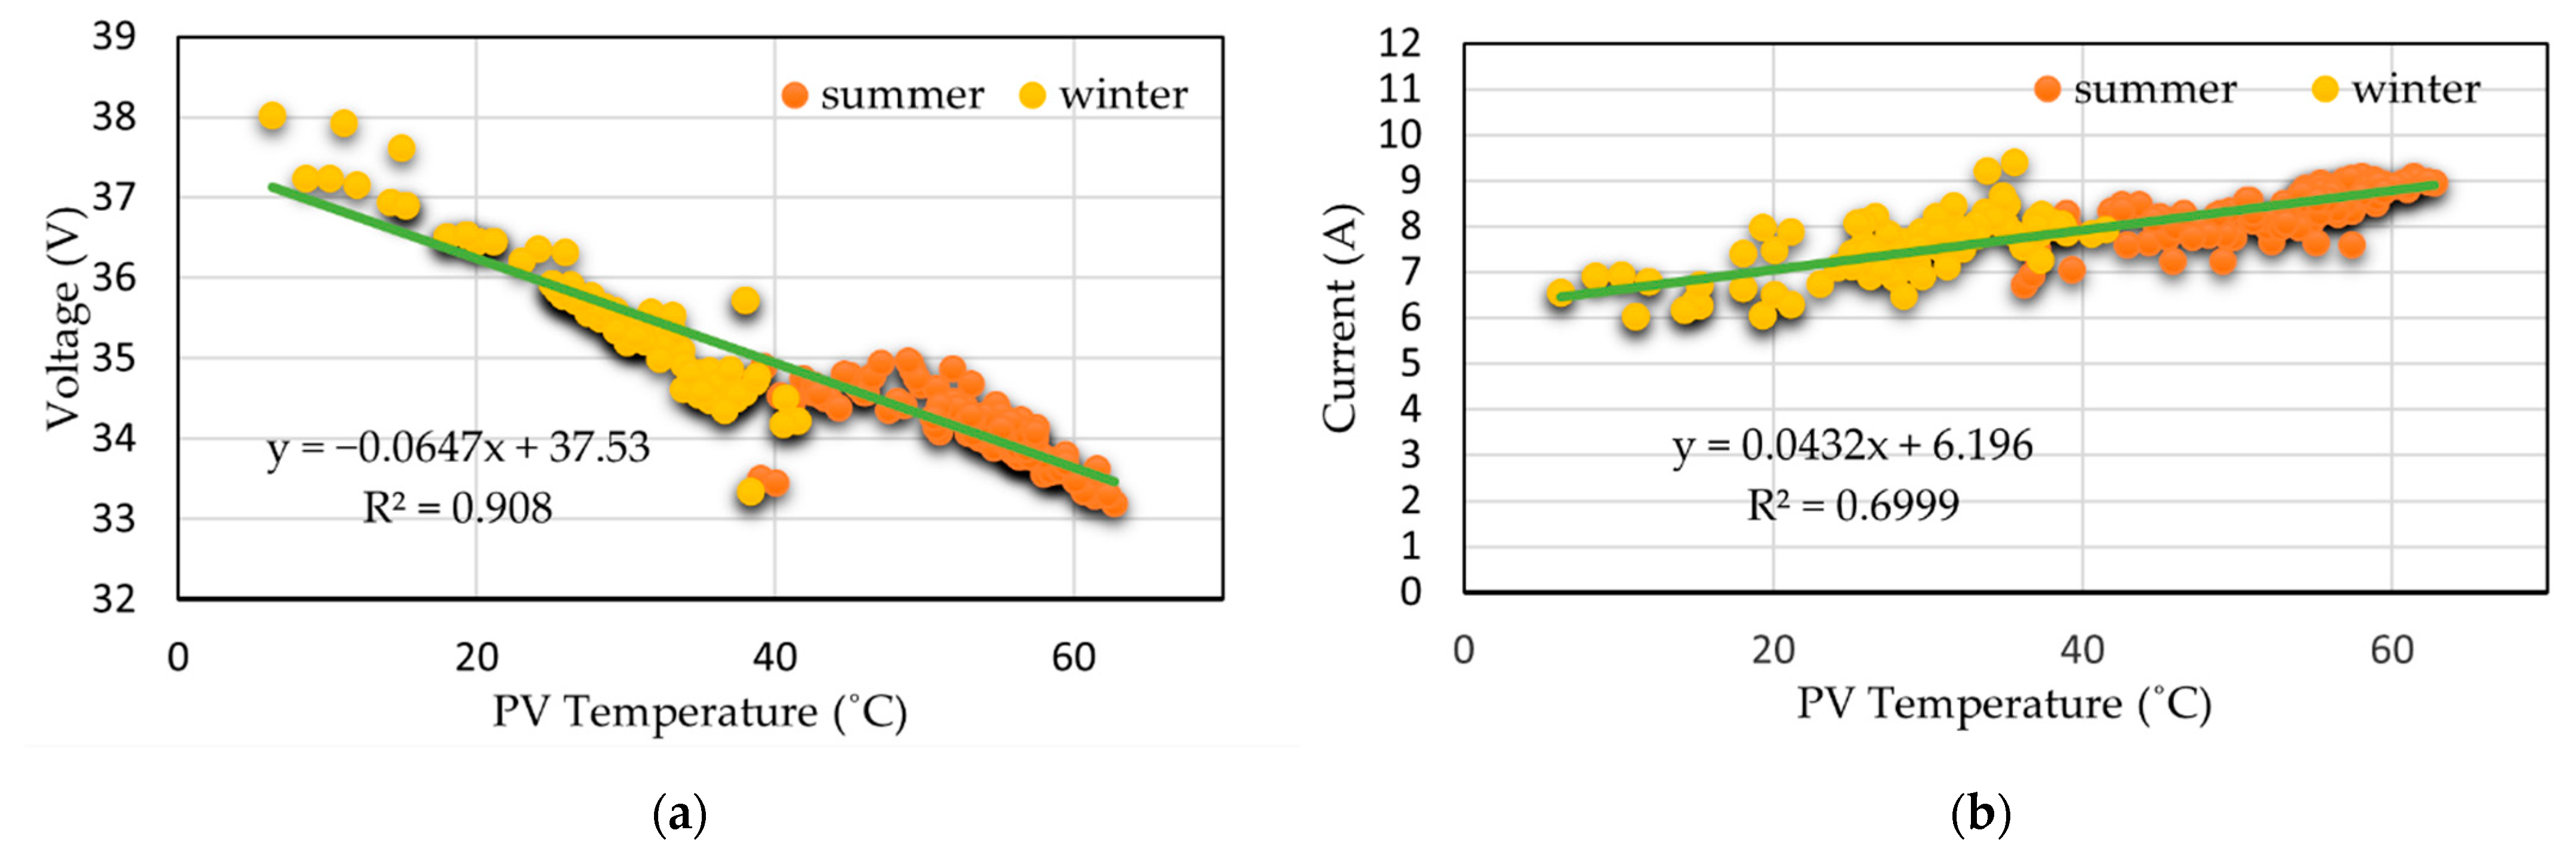 Energies Free Full Text The Simultaneous Impacts Of Seasonal Weather And Solar Conditions On Pv Panels Electrical Characteristics Html